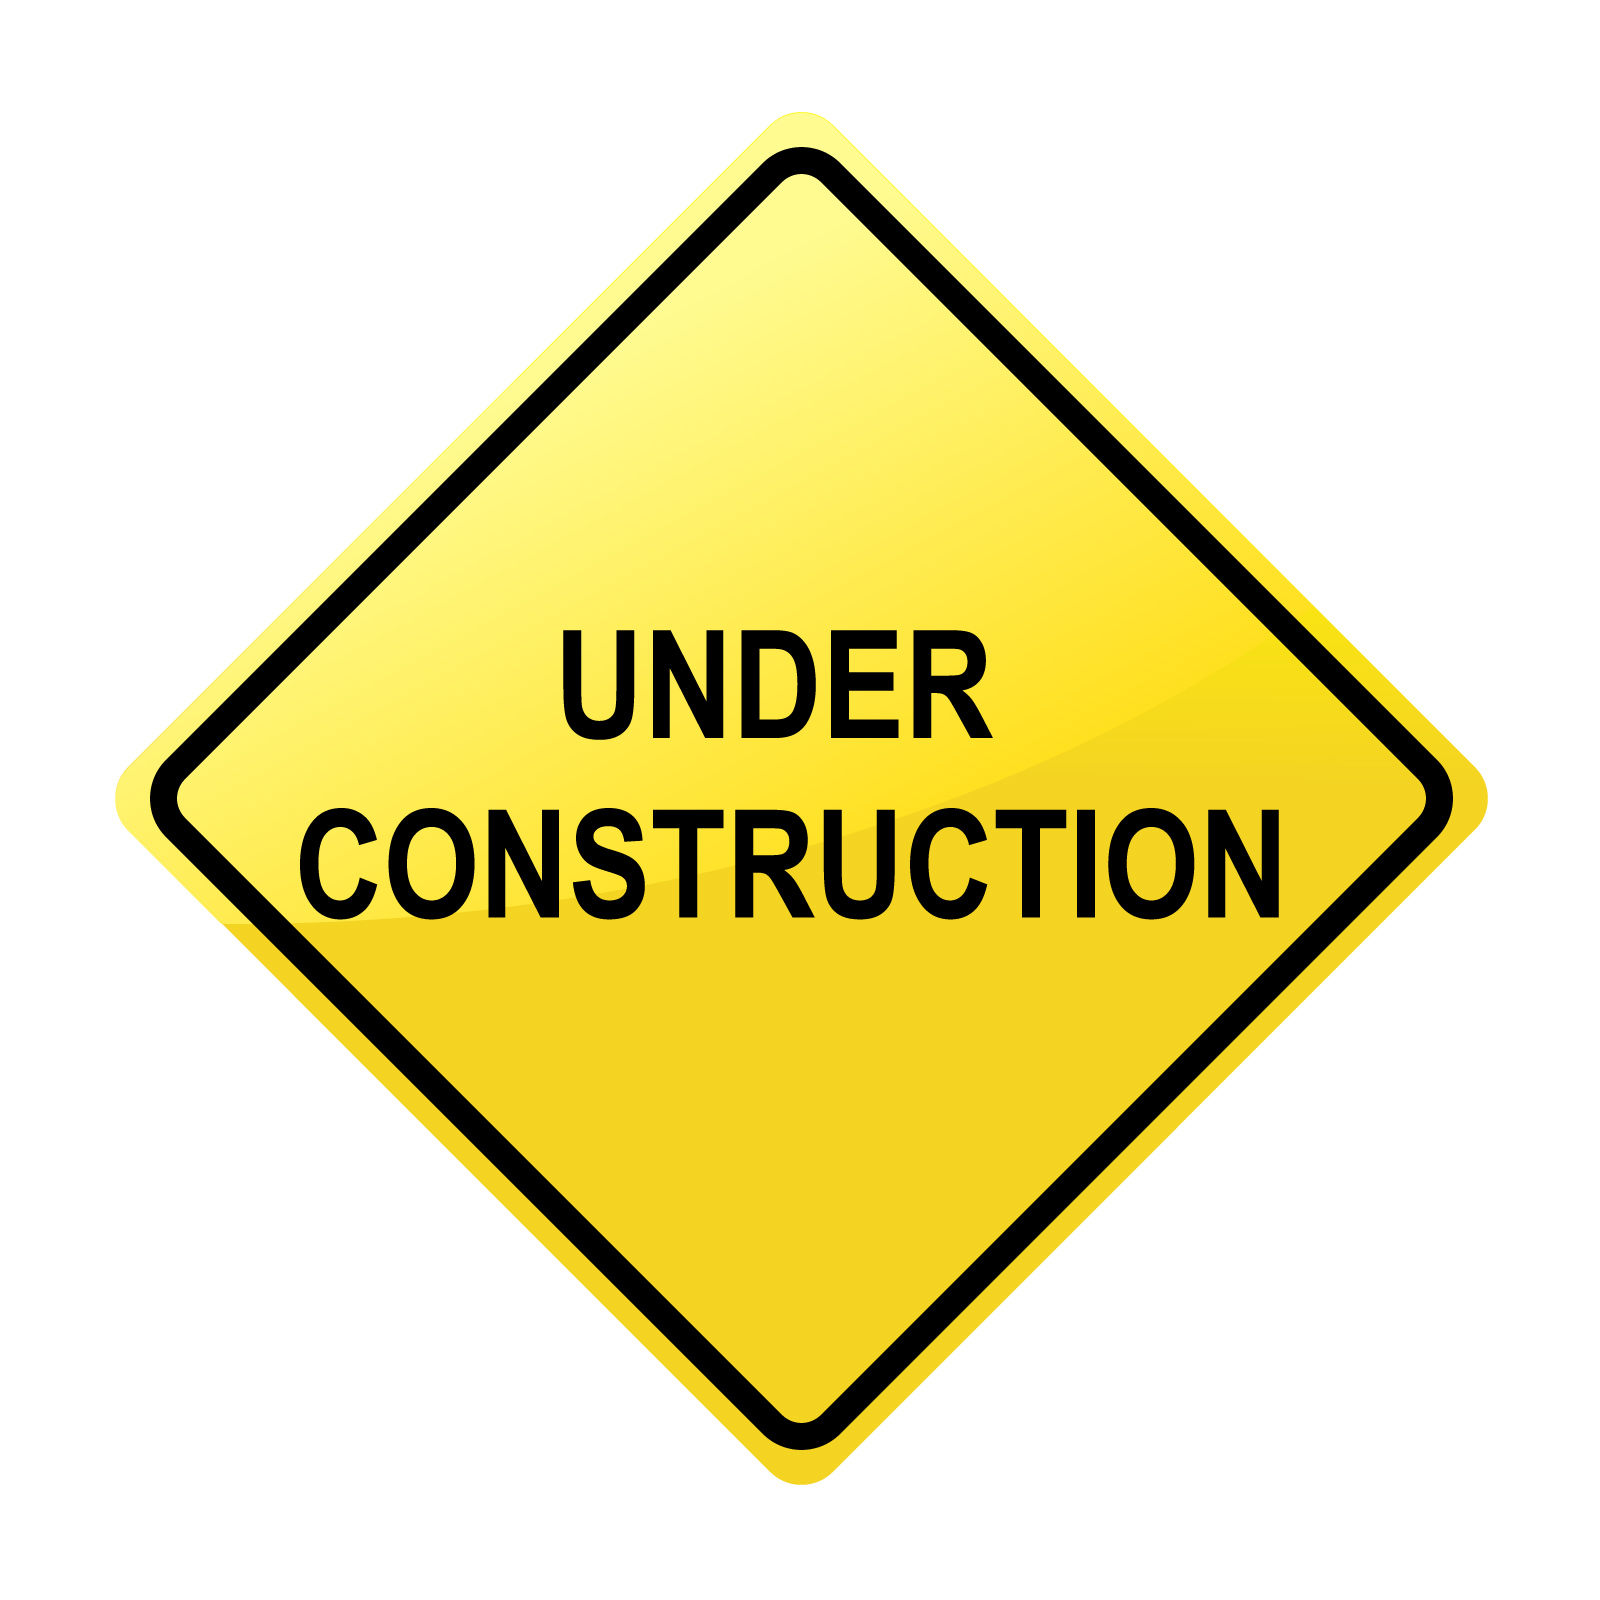 baby under construction clipart - photo #28